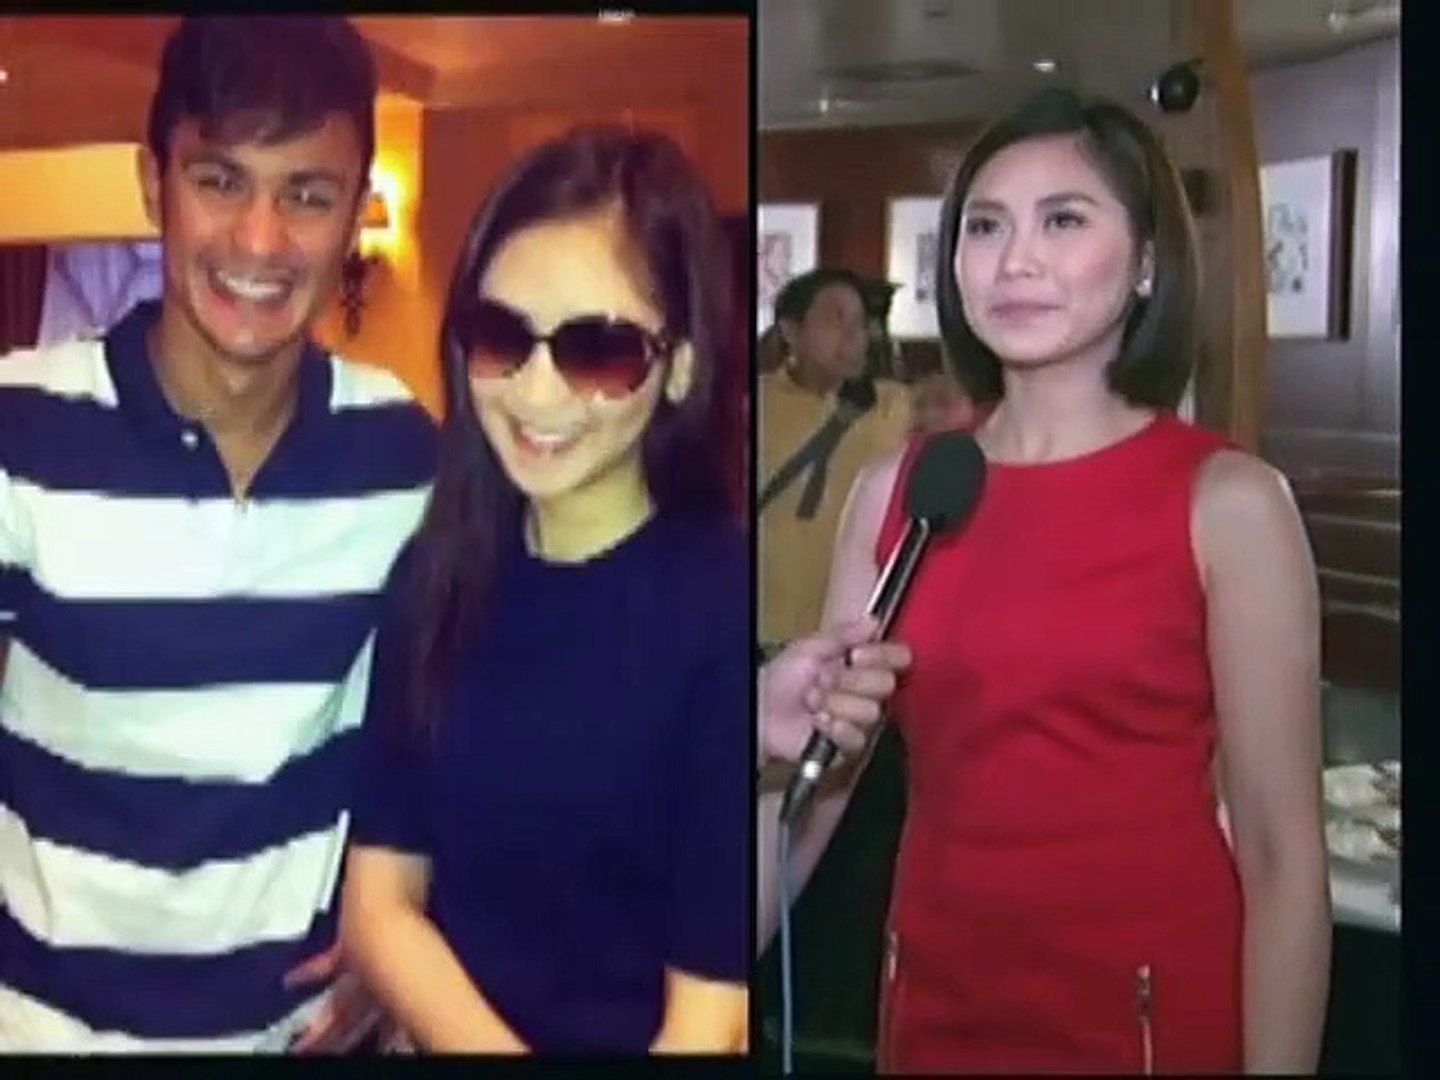 ⁣Matteo Guidicelli on Sarah Geronimo: She deserves all the happiness